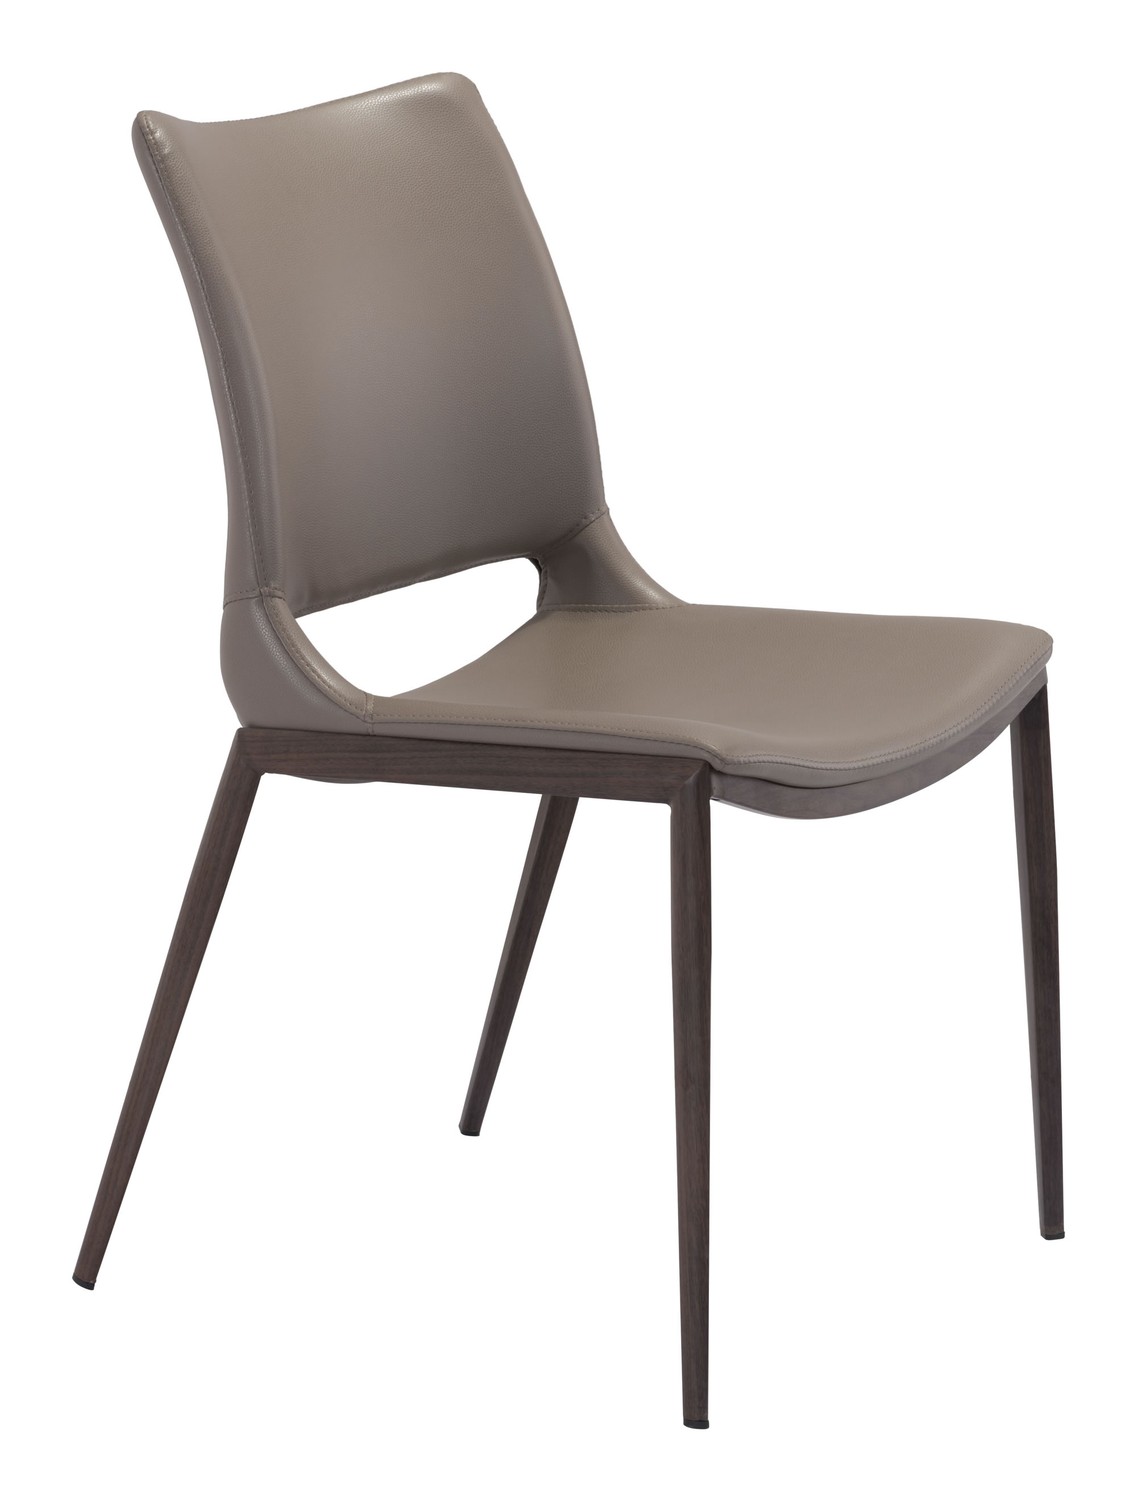 21.3" x 22.2" x 35" Gray & Walnut, Leatherette, Brushed Stainless Steel, Dining Chair - Set of 2